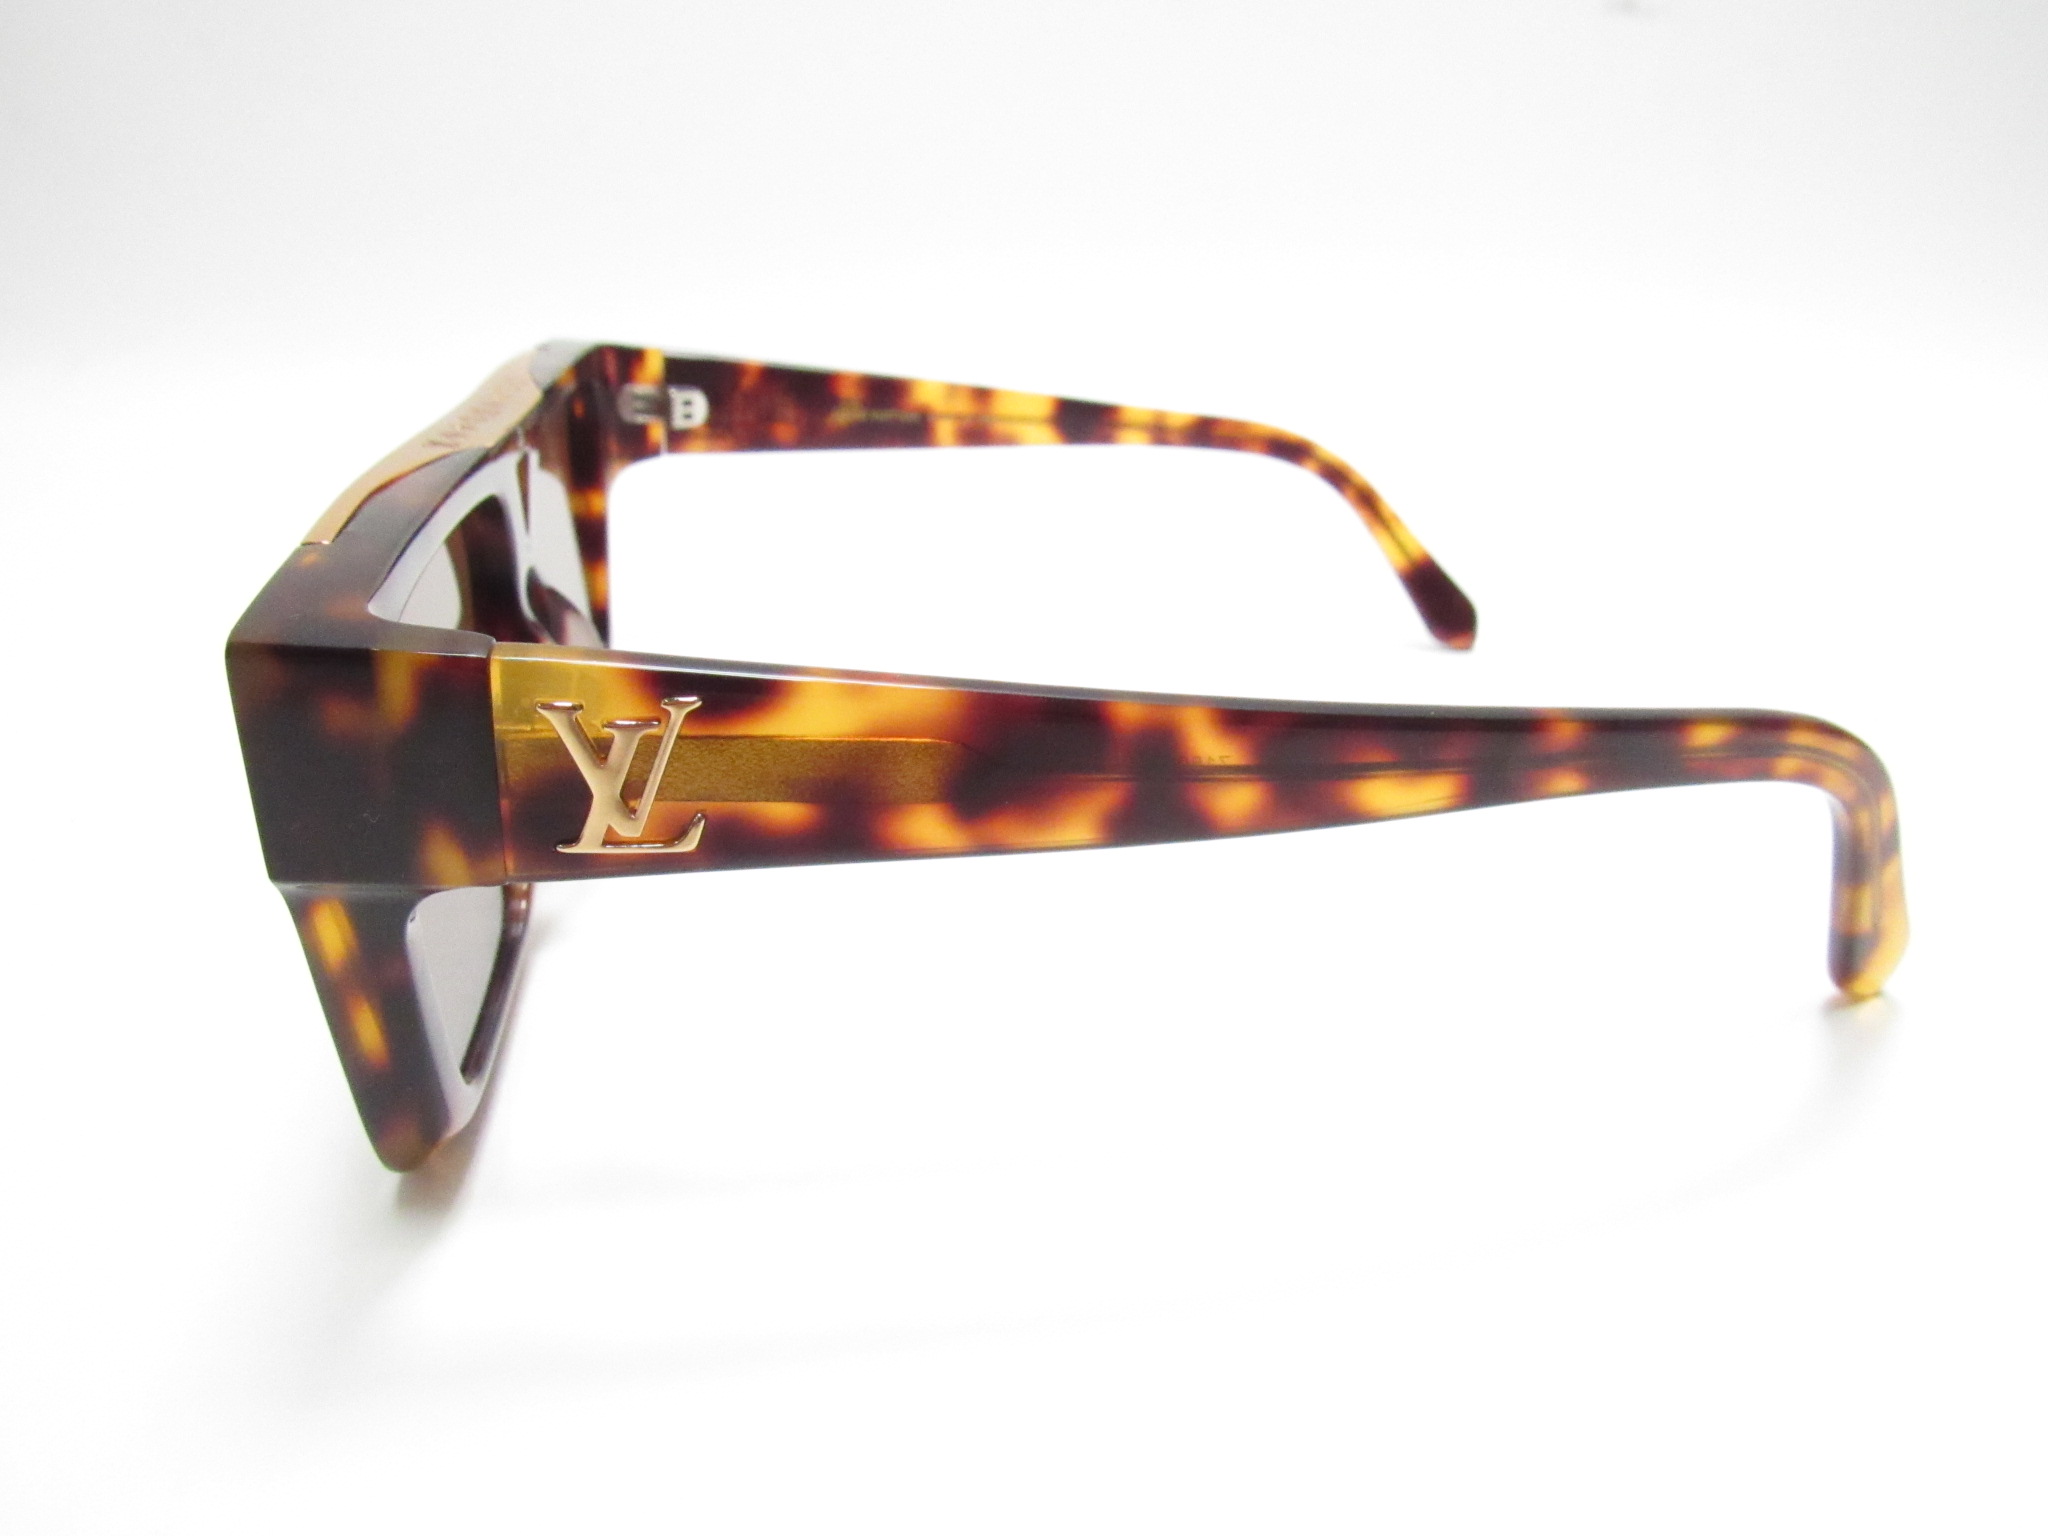 Louis Vuitton Sunglasses  Buy or Sell your LV Sunglasses online